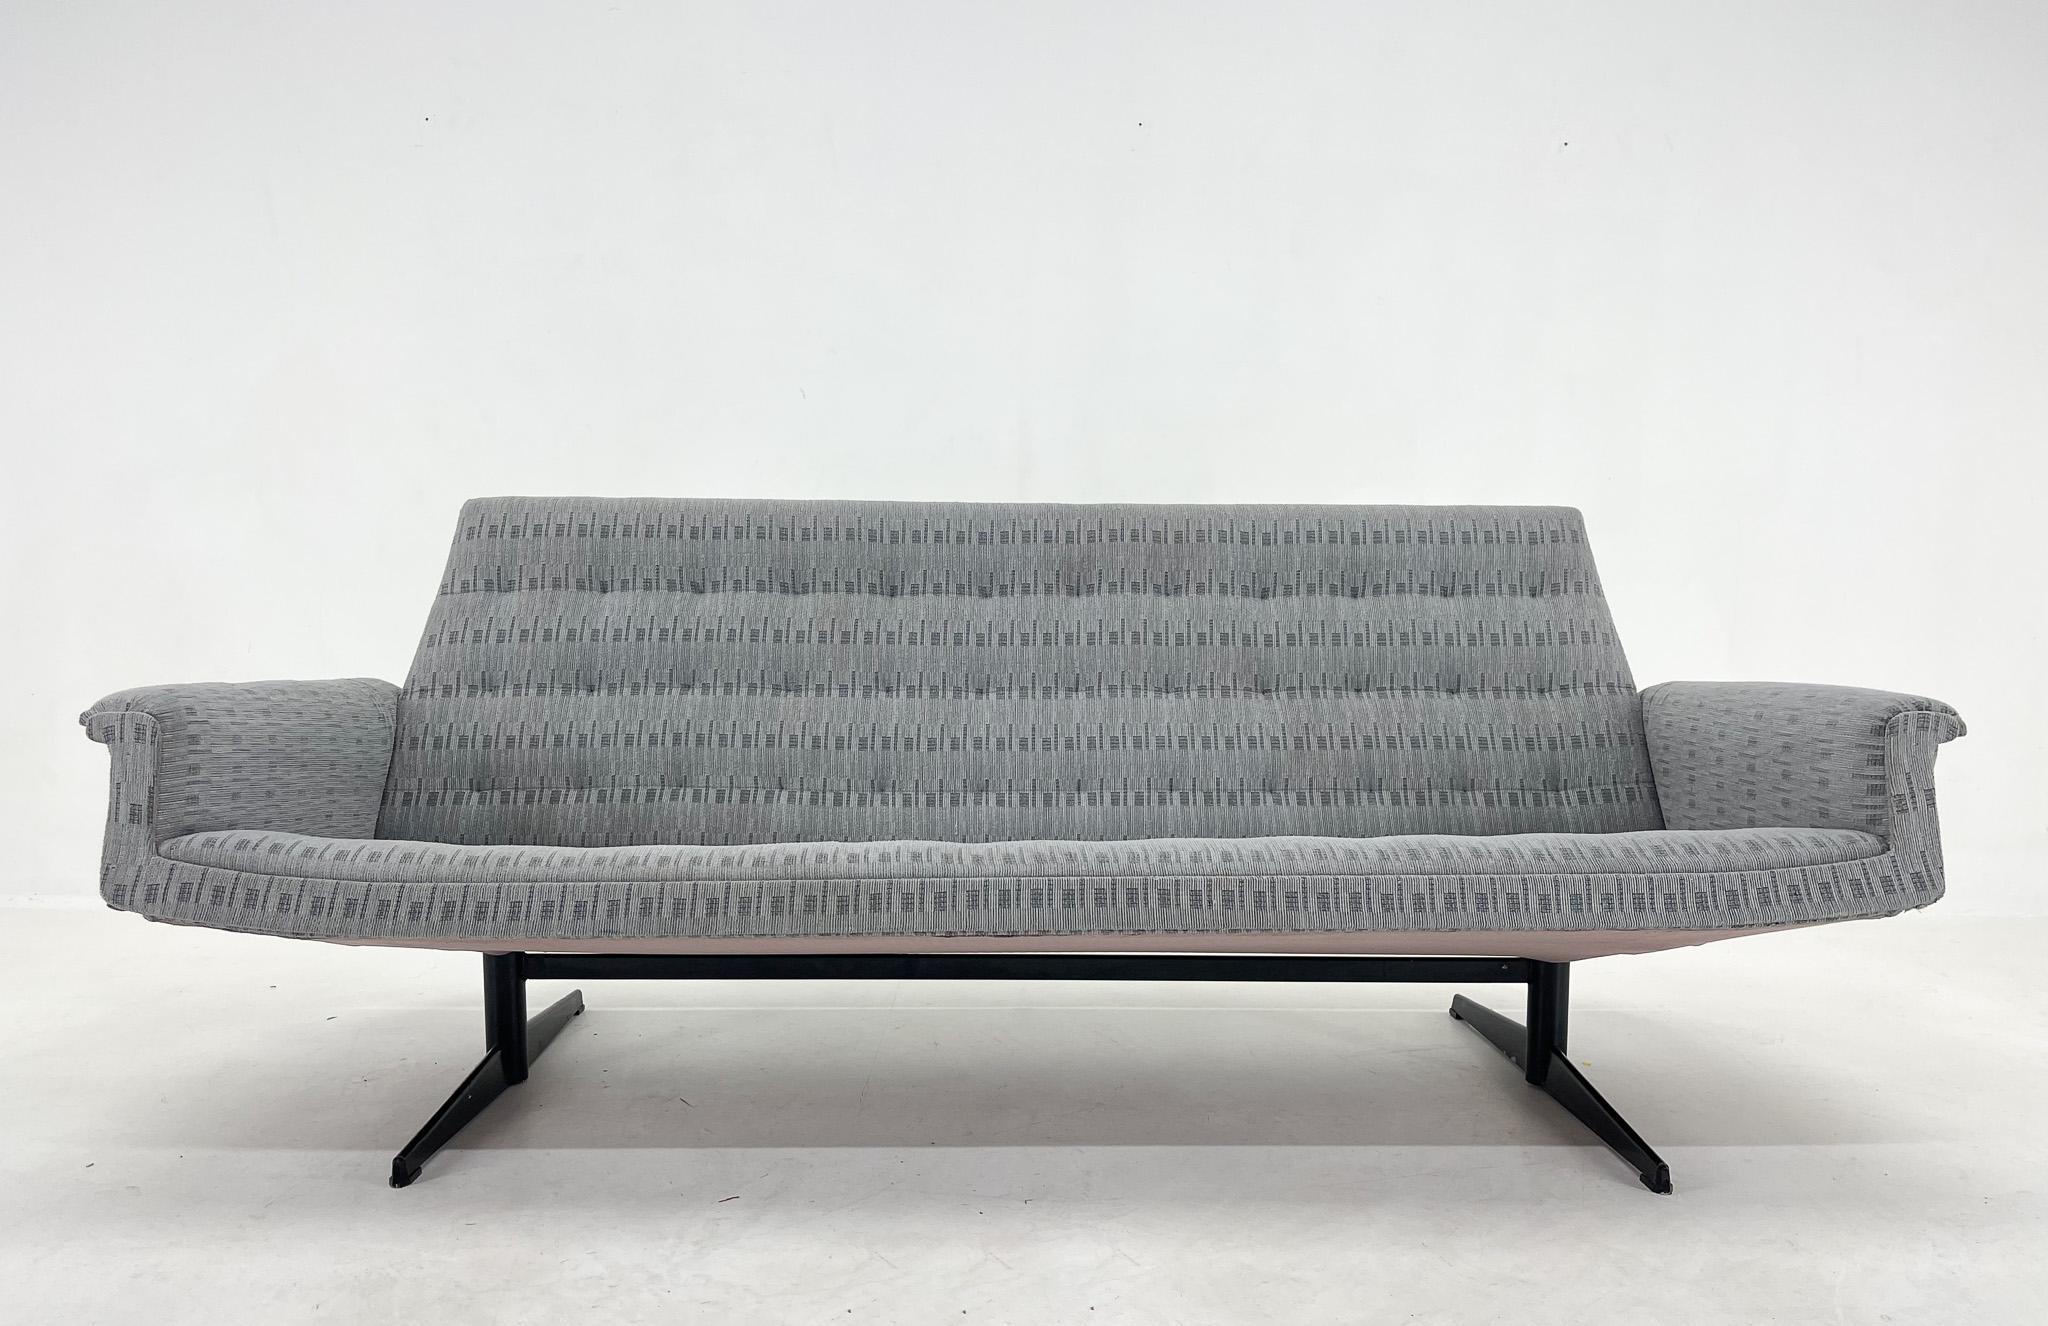 1960's Czechoslovakian 3-seat sofa in original upholstery. The seat is 36 cm high. Good original vintage condition.